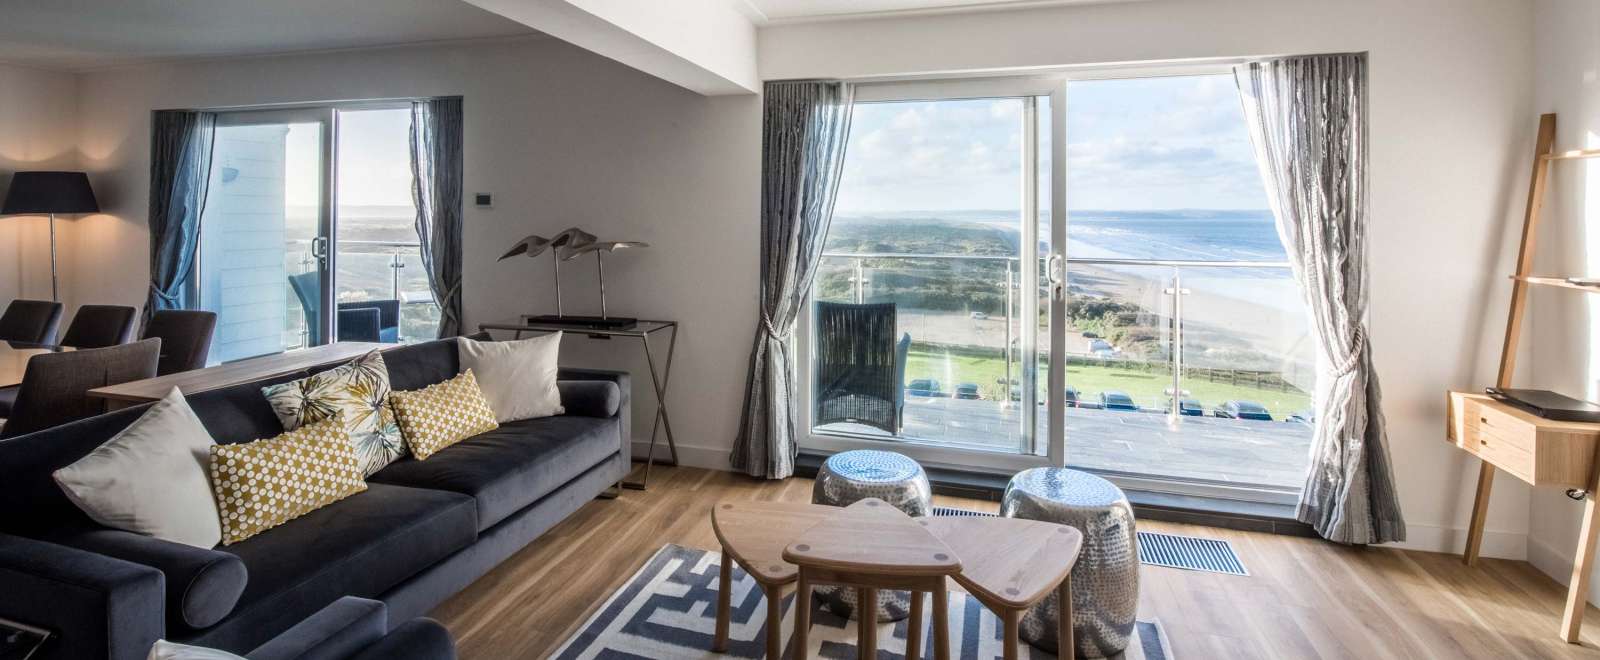 Saunton Sands Hotel Penthouse Accommodation Lounge with View Over Saunton Beach